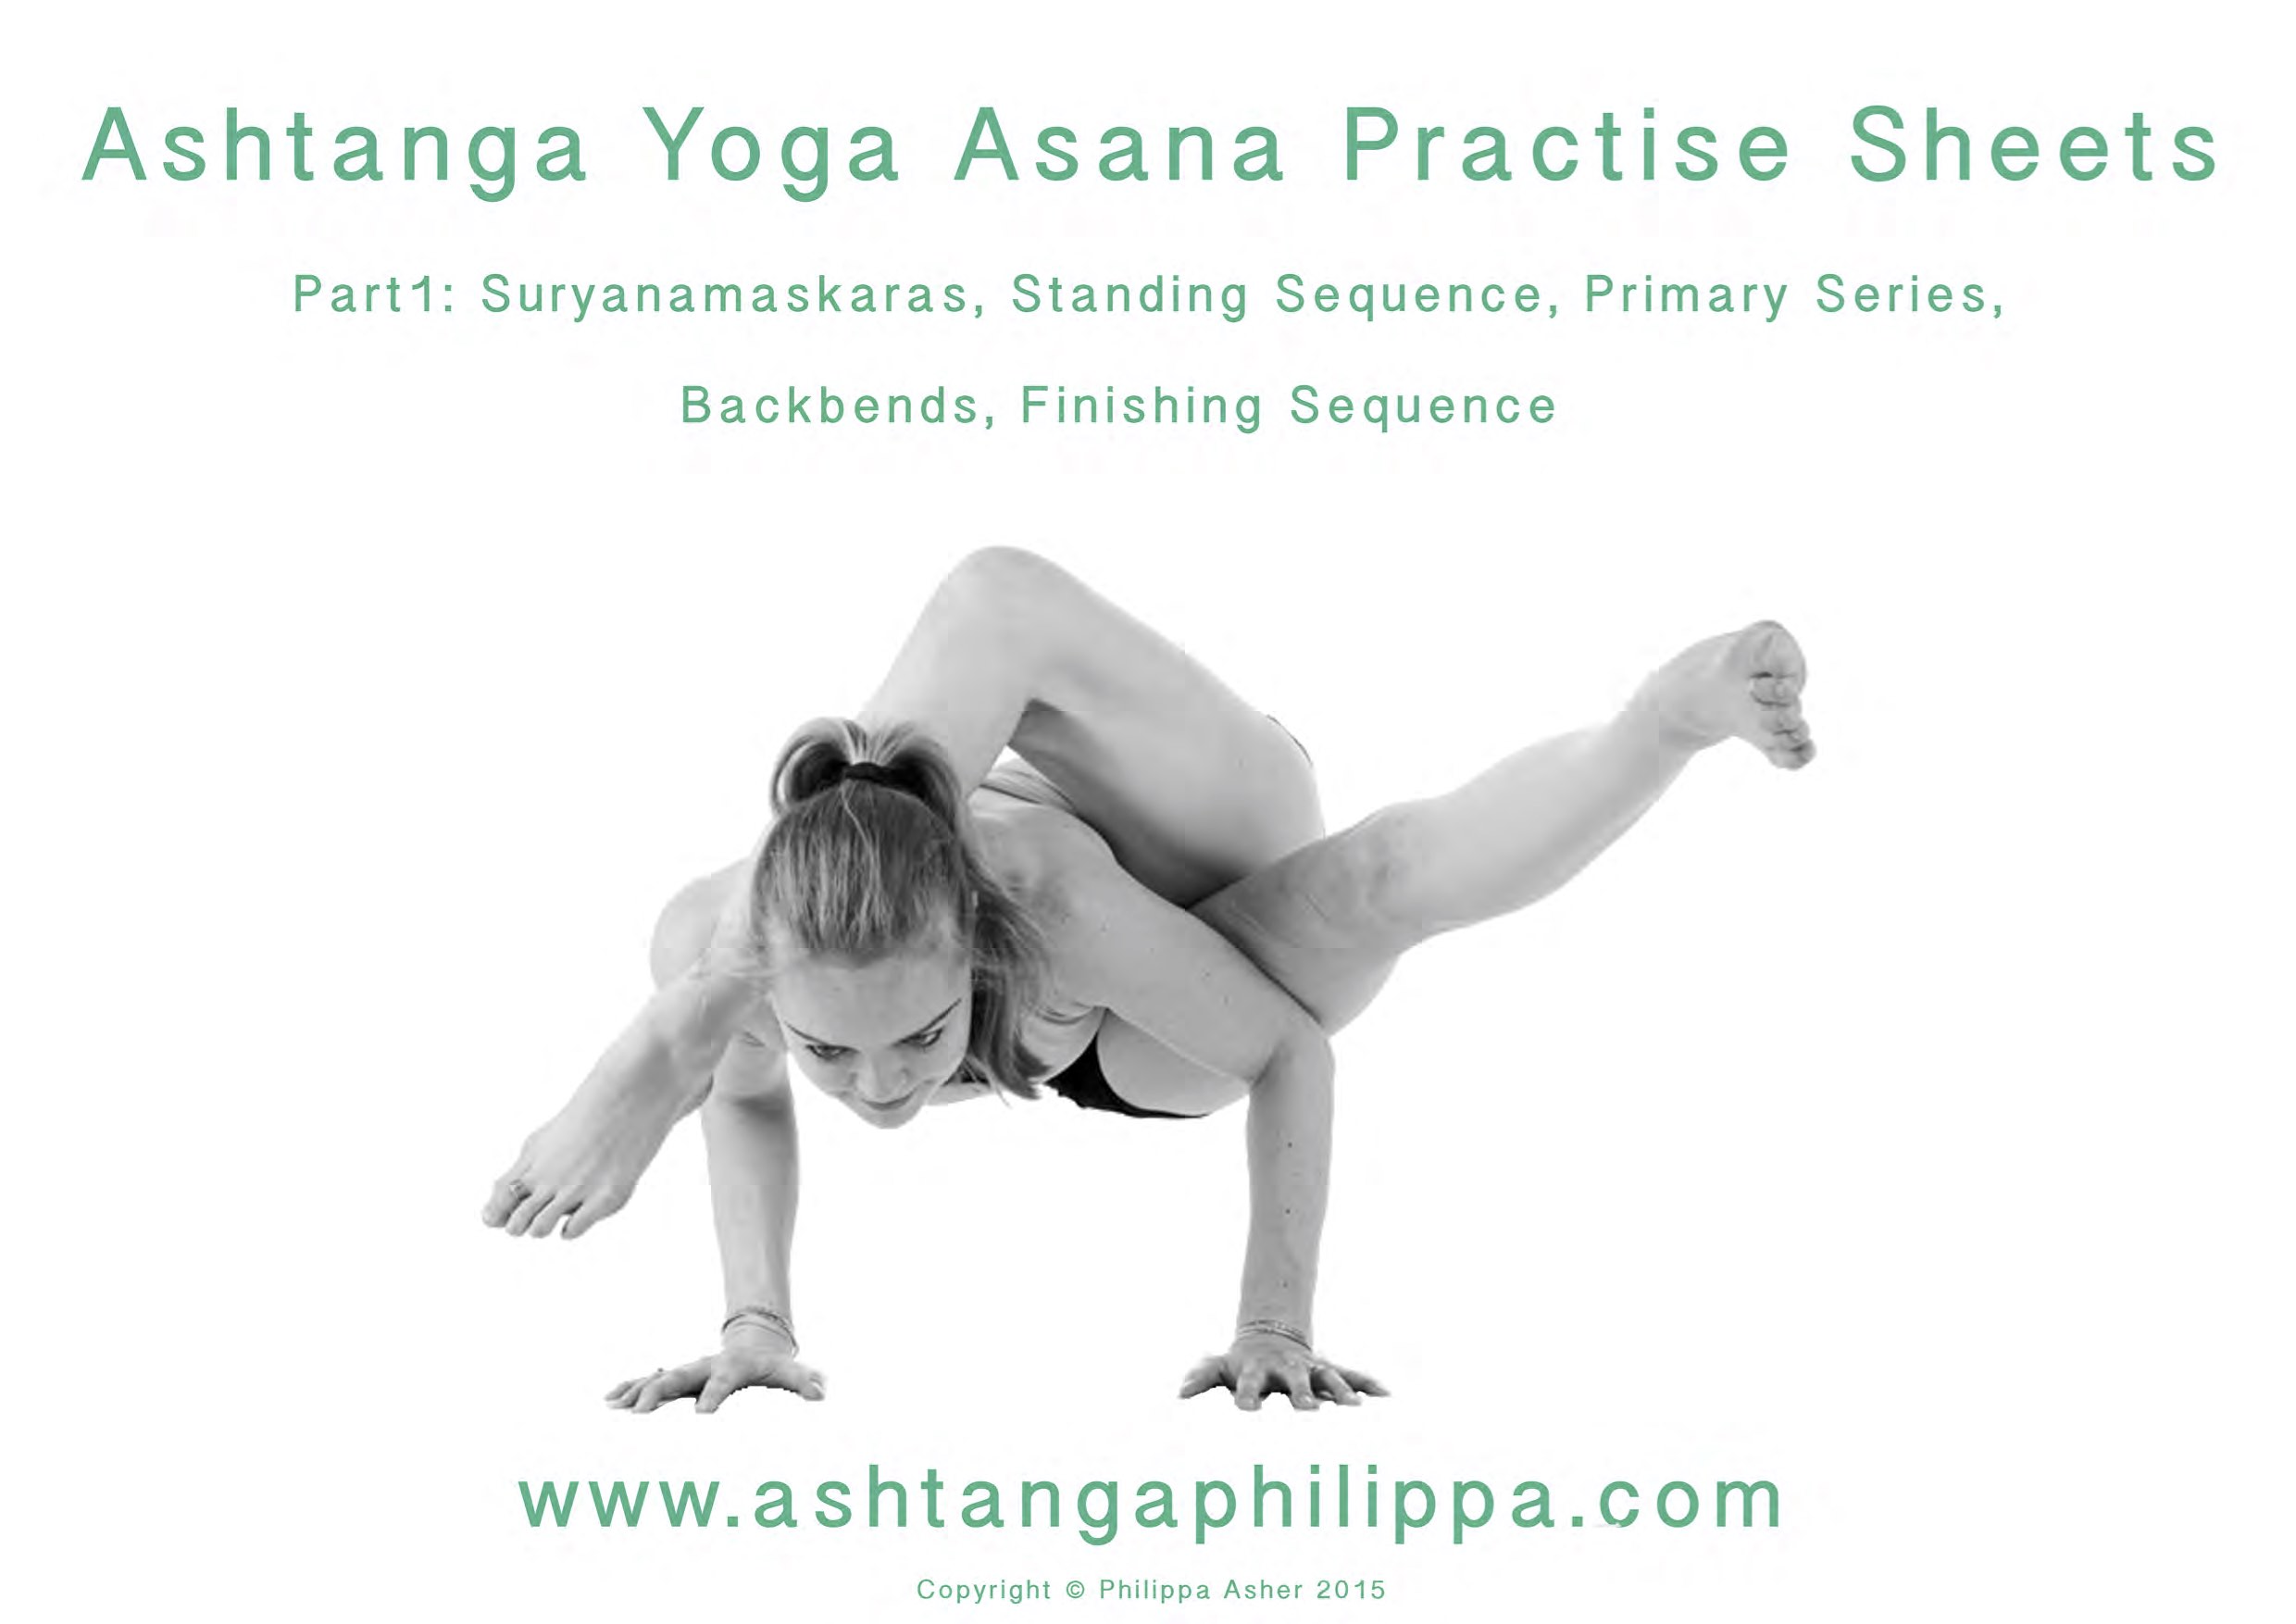 Ashtanga Yoga Poses: A Beginner's Guide to the Primary Series - YOGA  PRACTICE